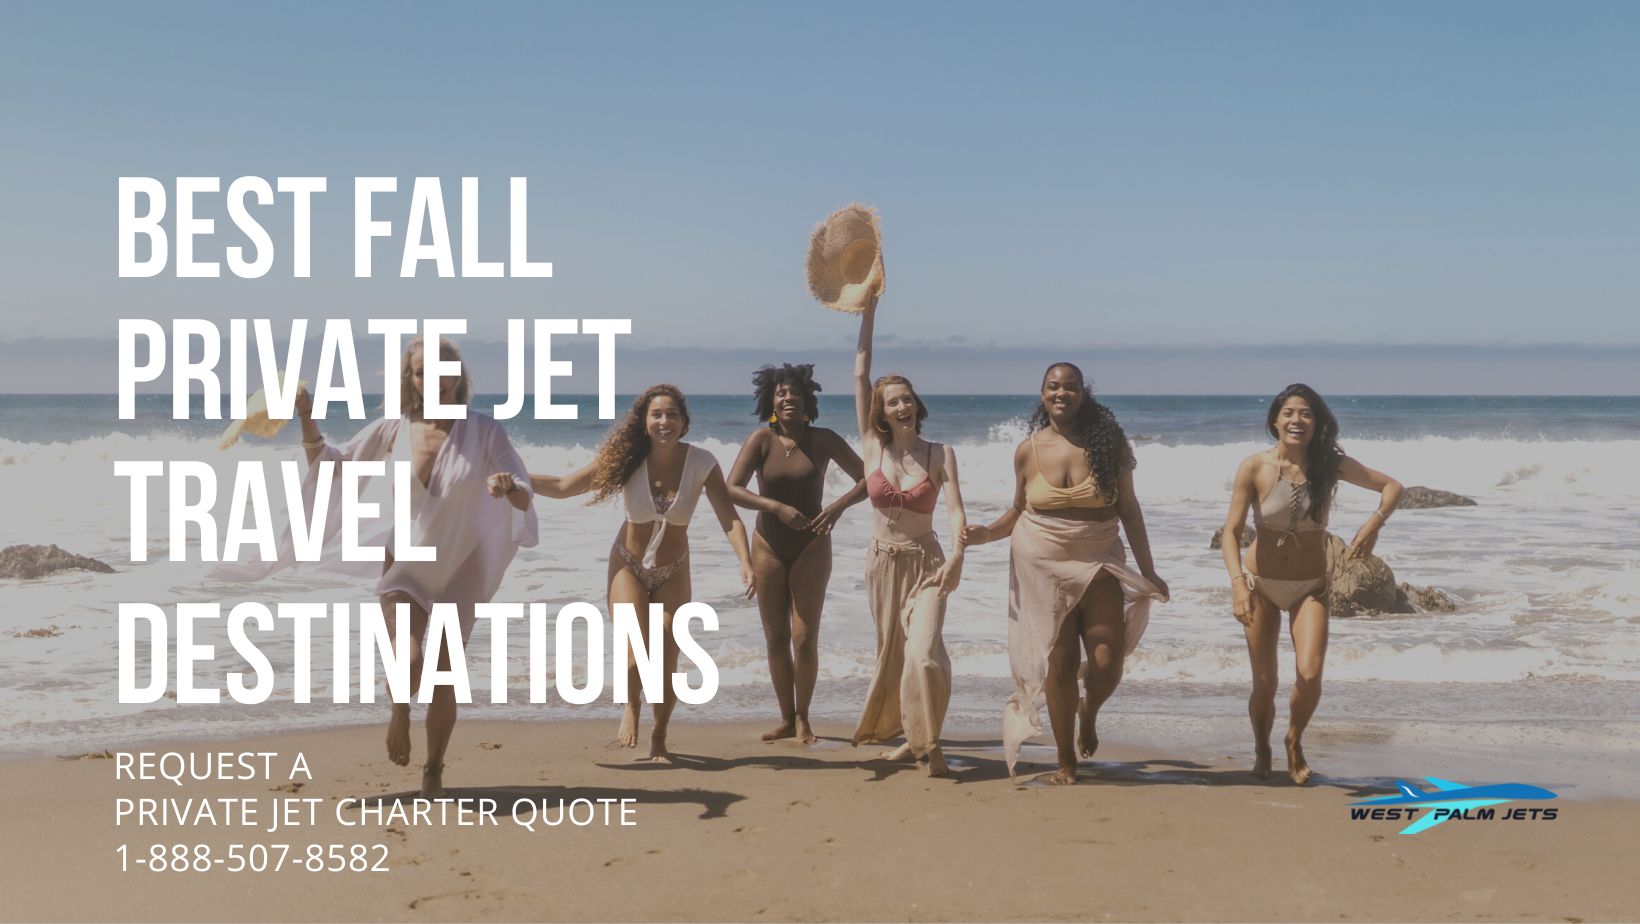 Best Fall Private Jet Travel Destinations